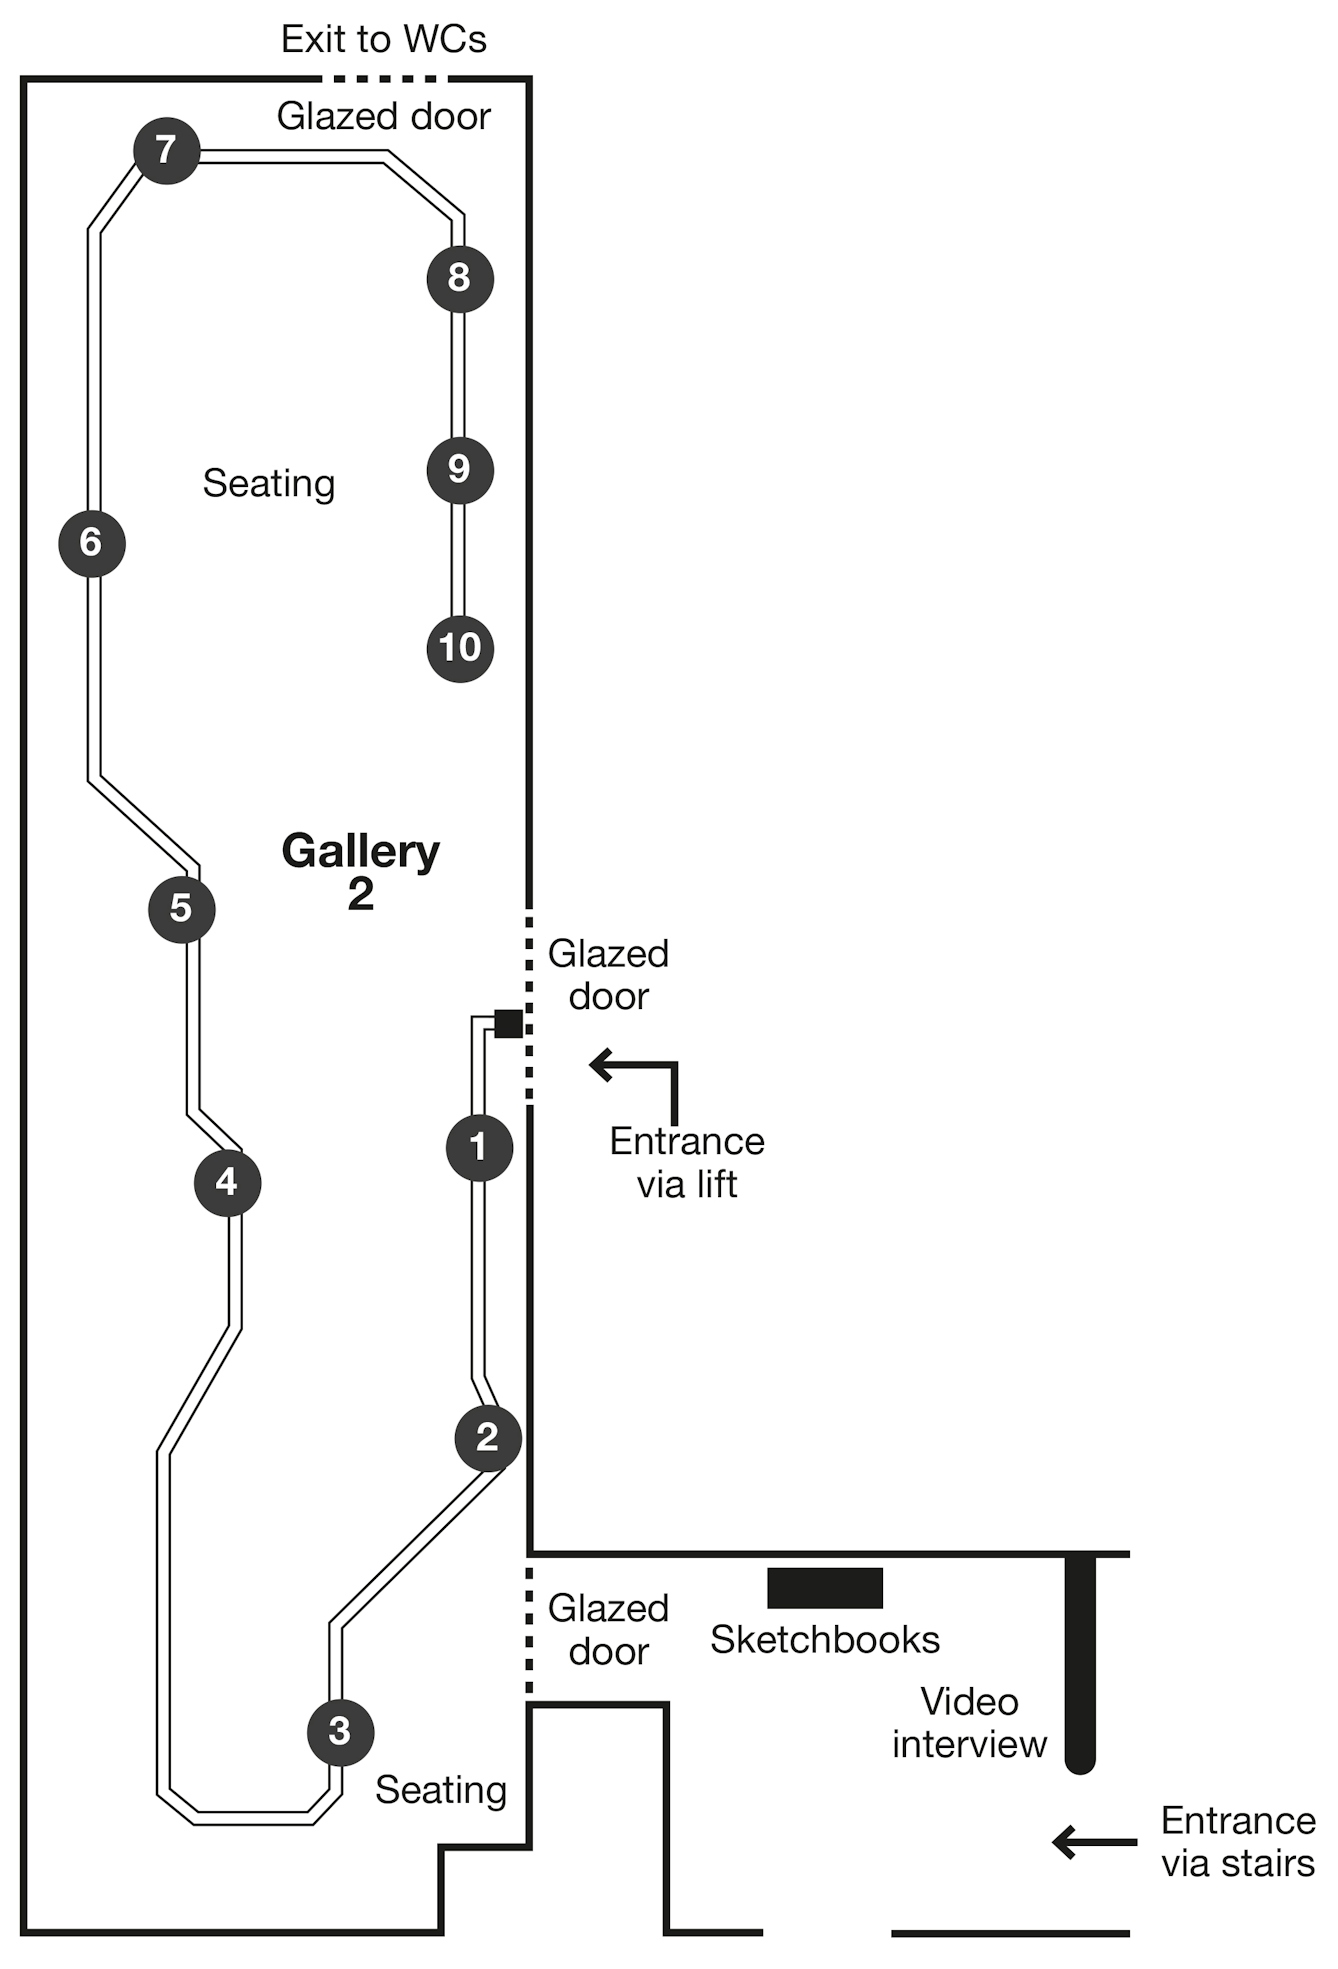 A map of Gallery 2 in Wellcome Collection.